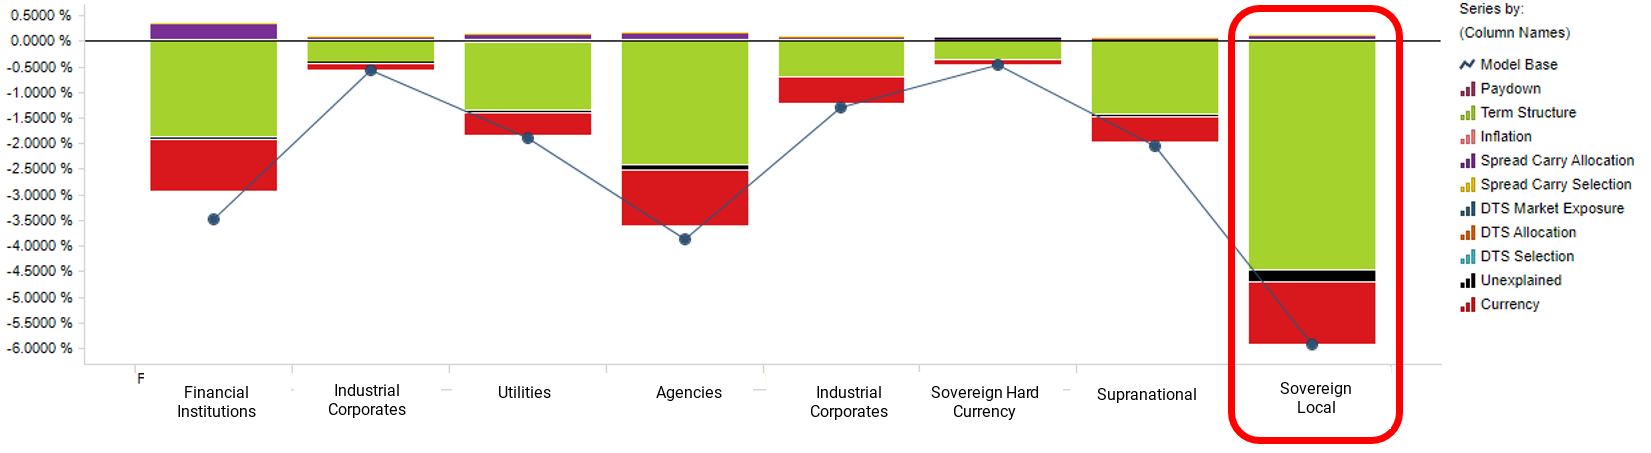 This exhibit shows a performance attribution, breaking down the returns of the various issuer types in the Bloomberg MSCI Green Bond Index, from November 2021 to January 2023 — a period of rising global interest rates. It shows that government-issued green bonds hurt index performance in this period because of their greater sensitivity to rates